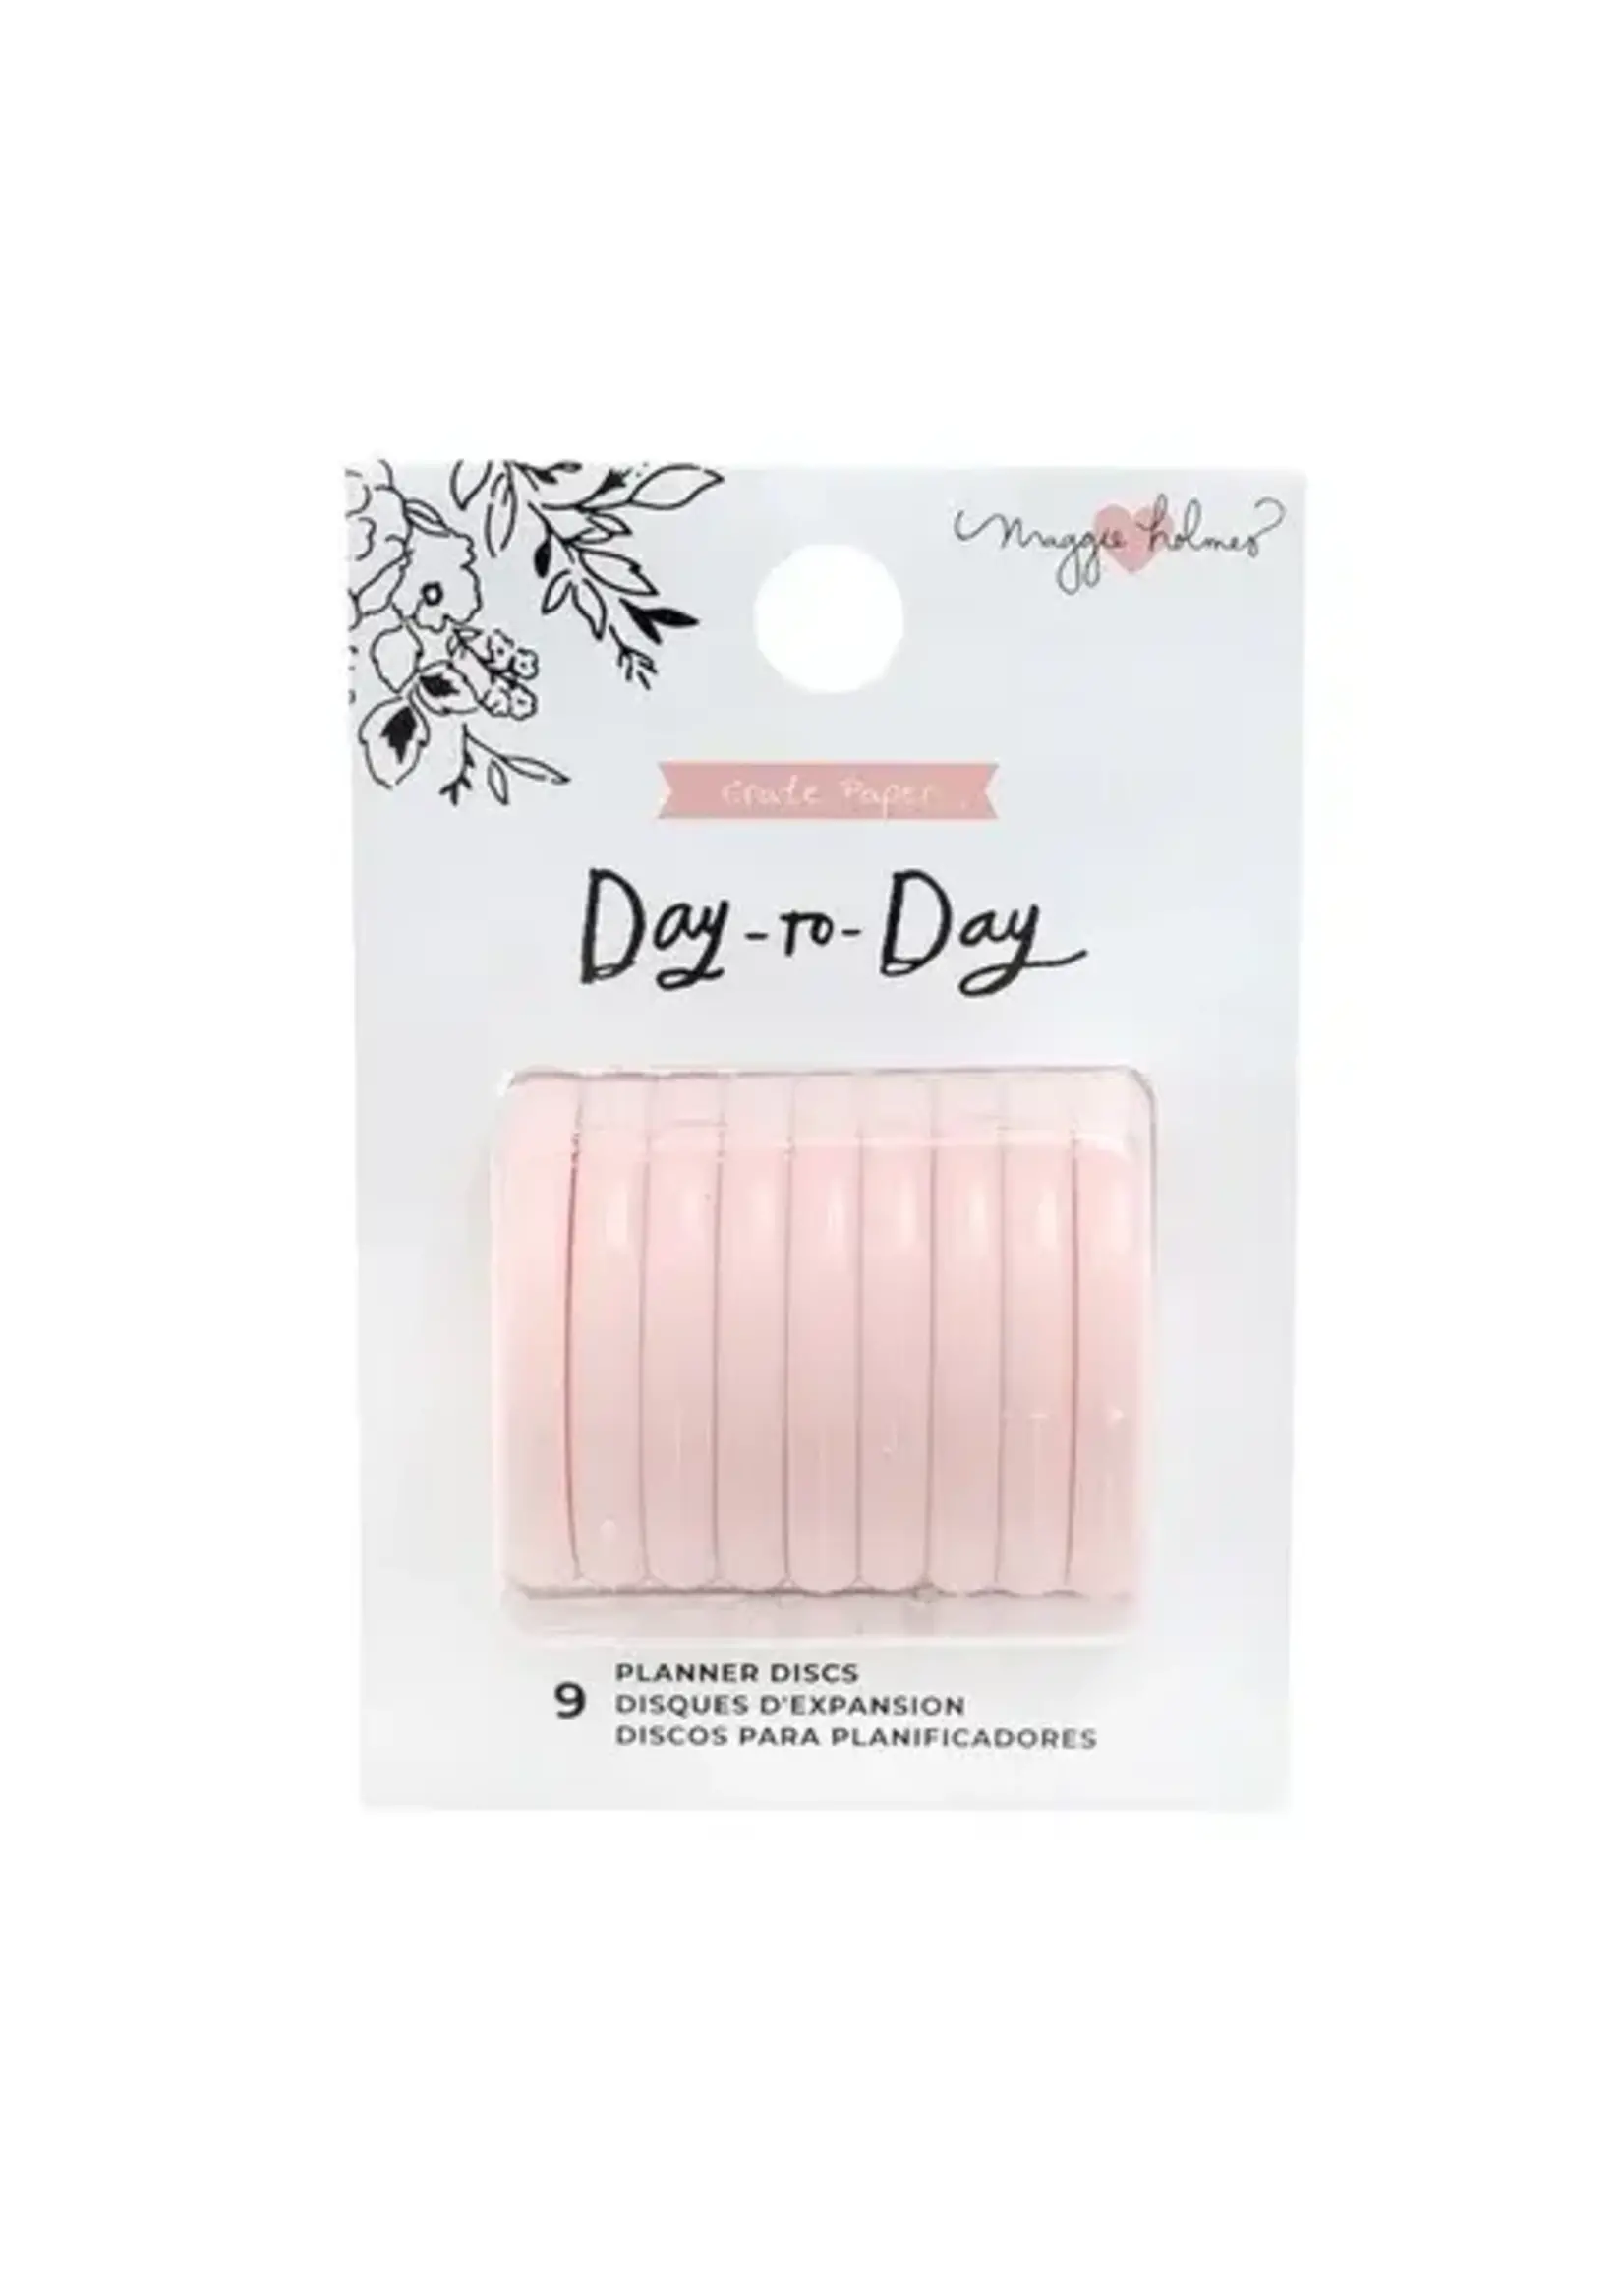 We 'R Memory Keepers Crate Paper • Day-to-Day planner discs medium Blush SKU: 373033 9 stuks